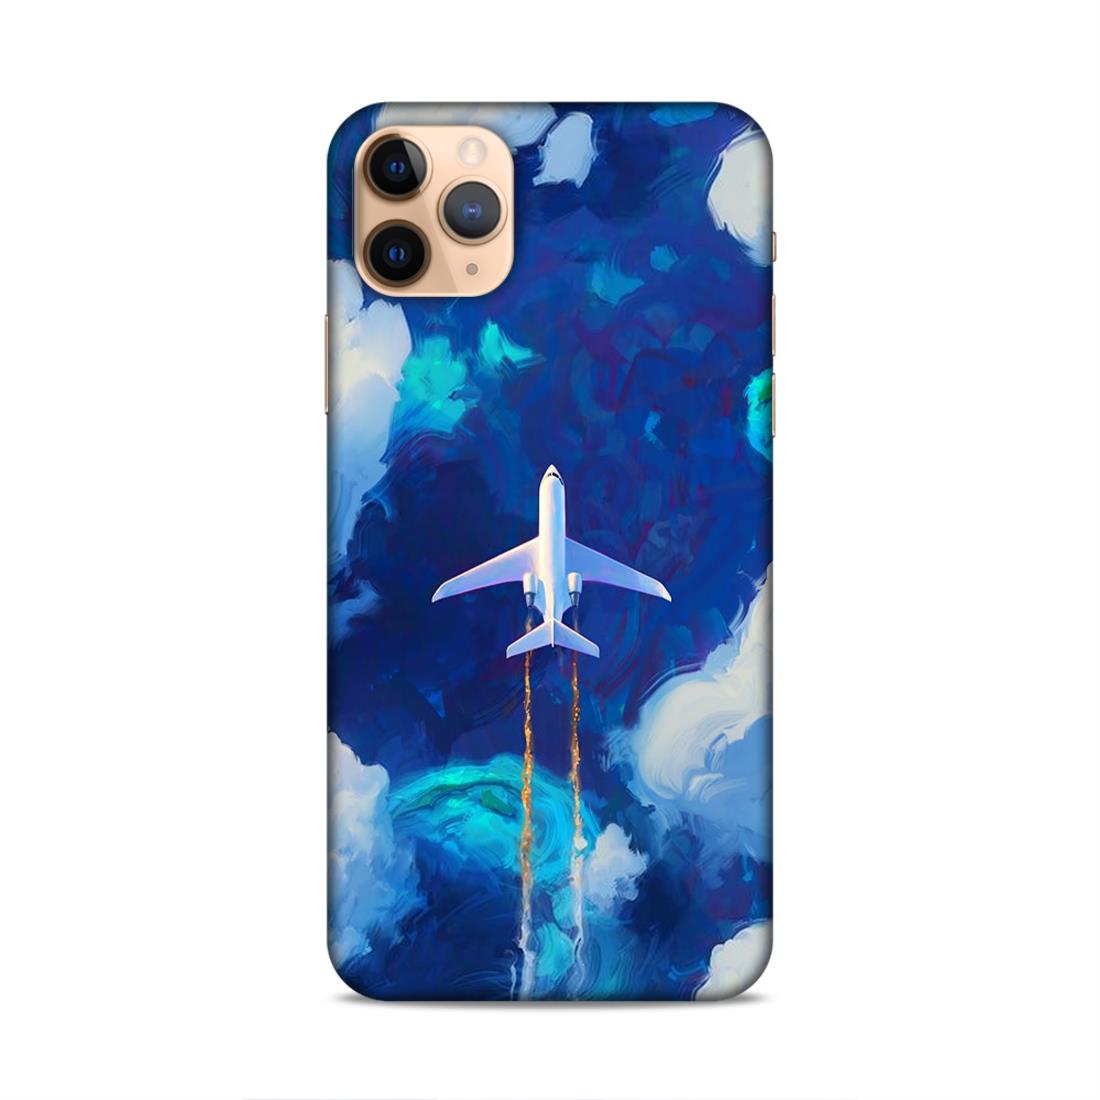 Aeroplane In The Sky Hard Back Case For Apple iPhone 11 Pro